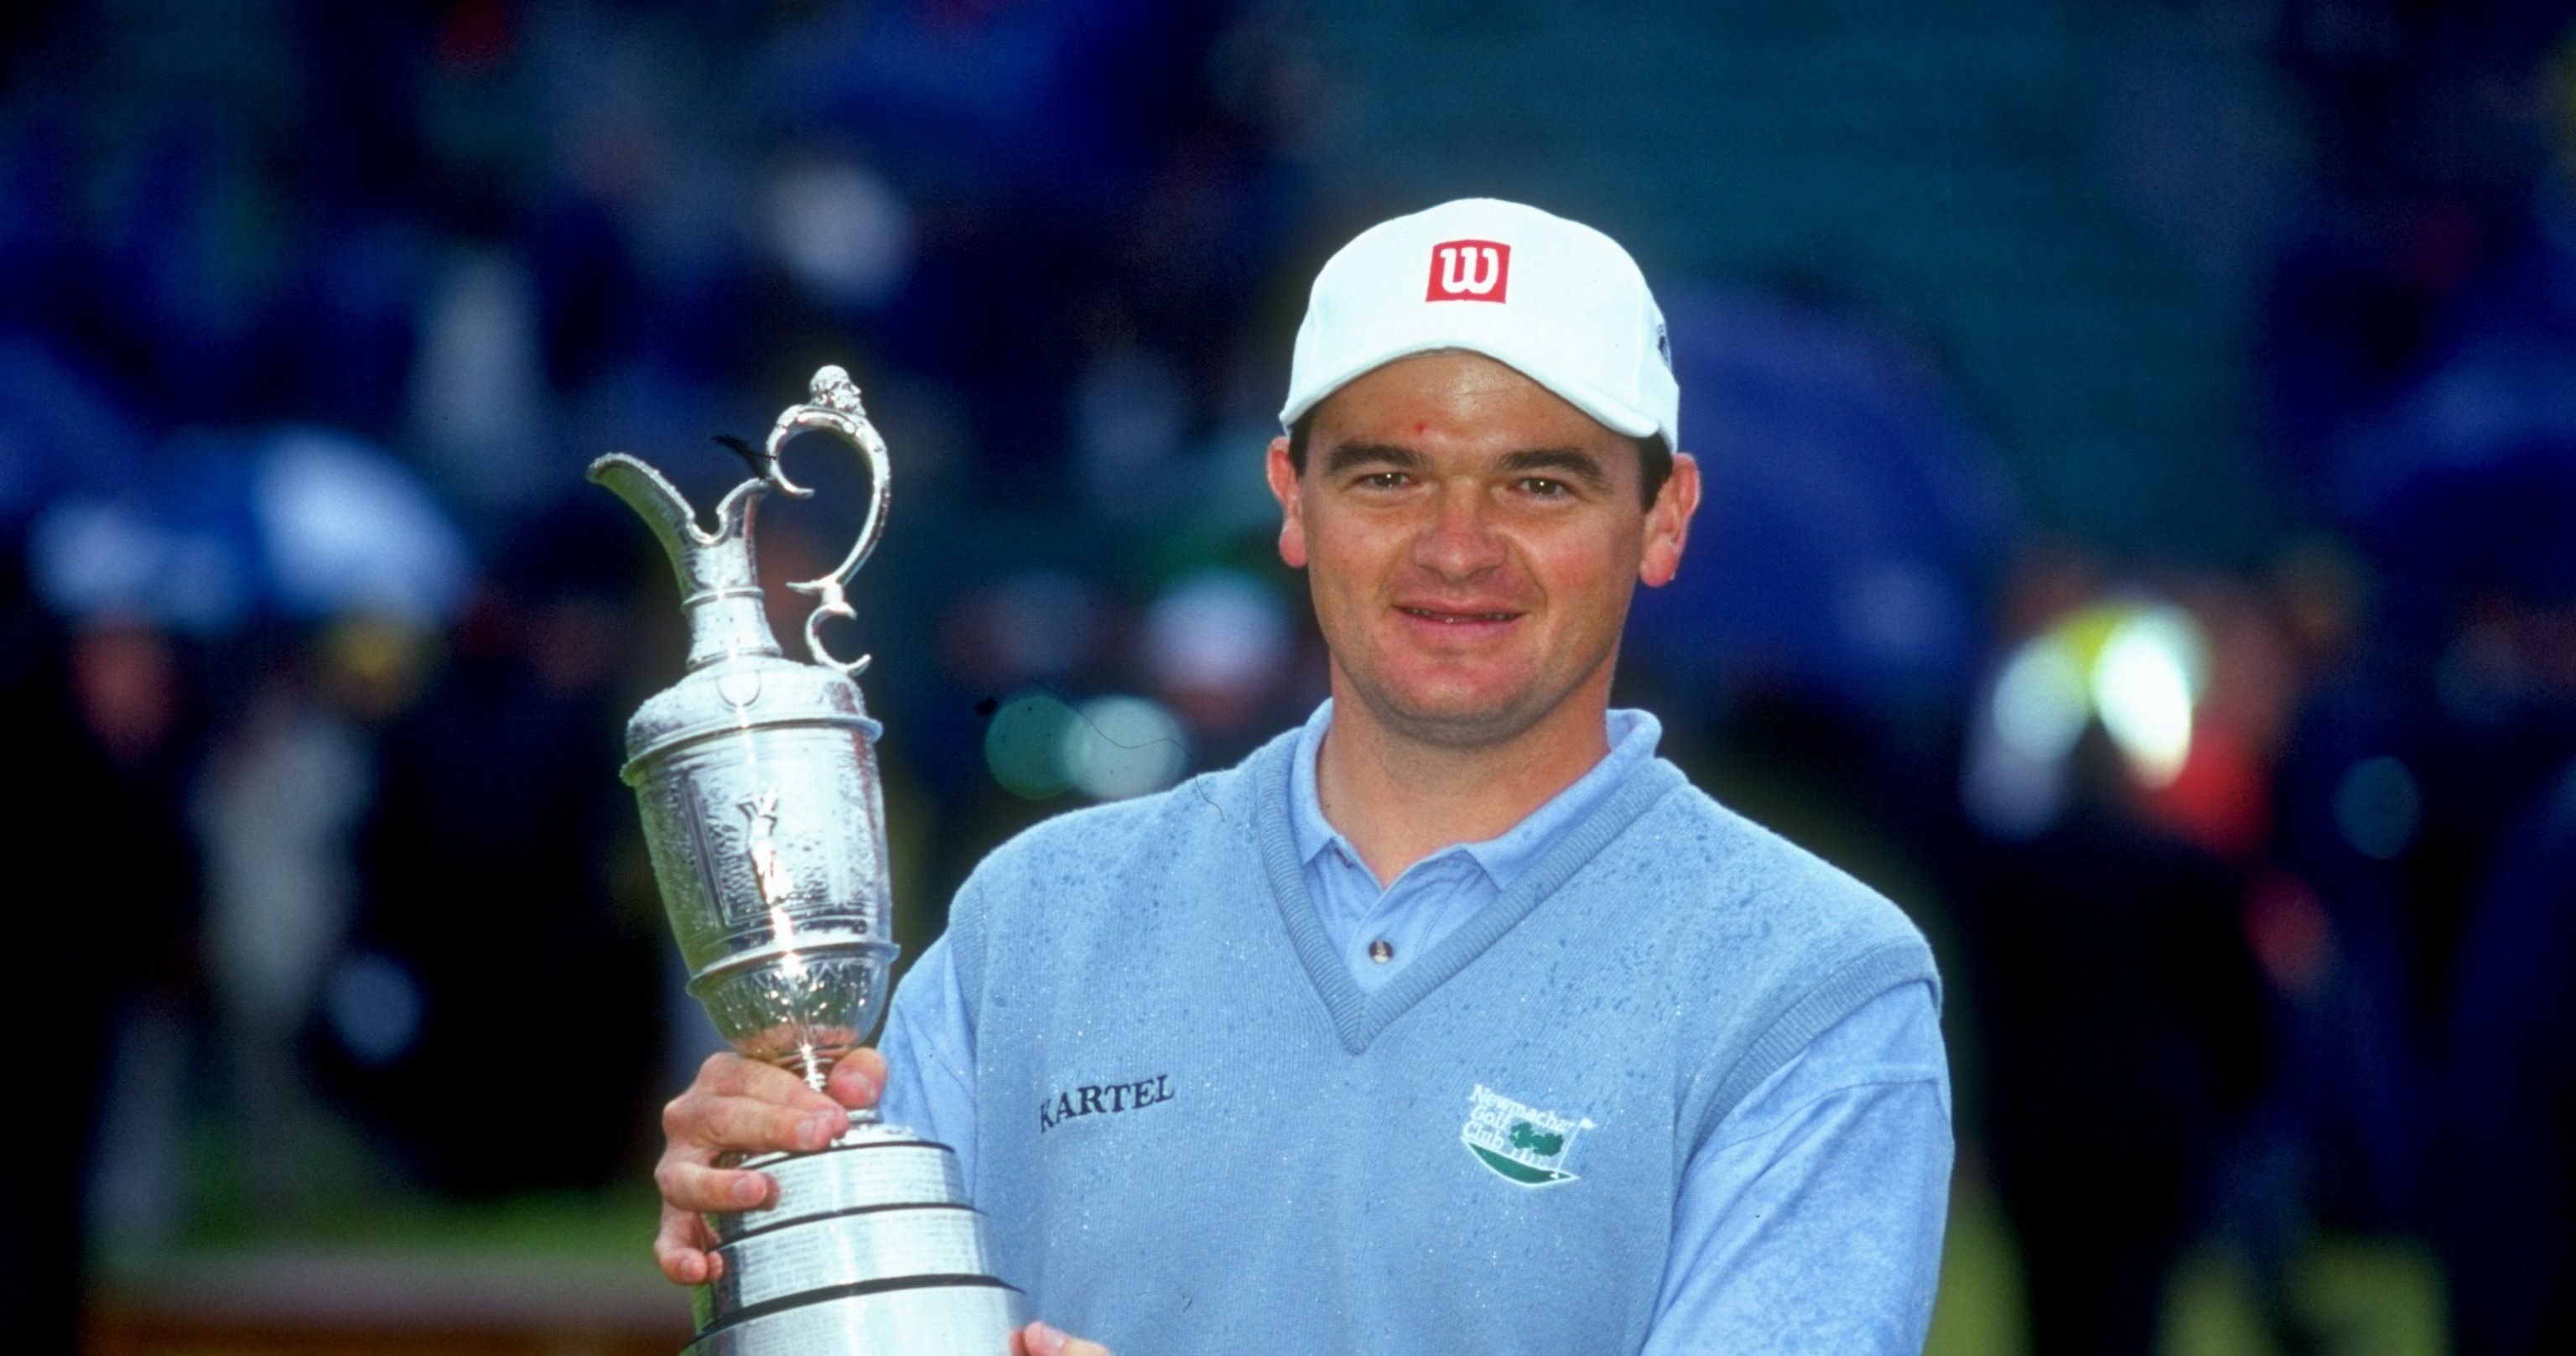 Paul Lawrie's victory at the 1999 Open transformed the Aberdeen man's life.